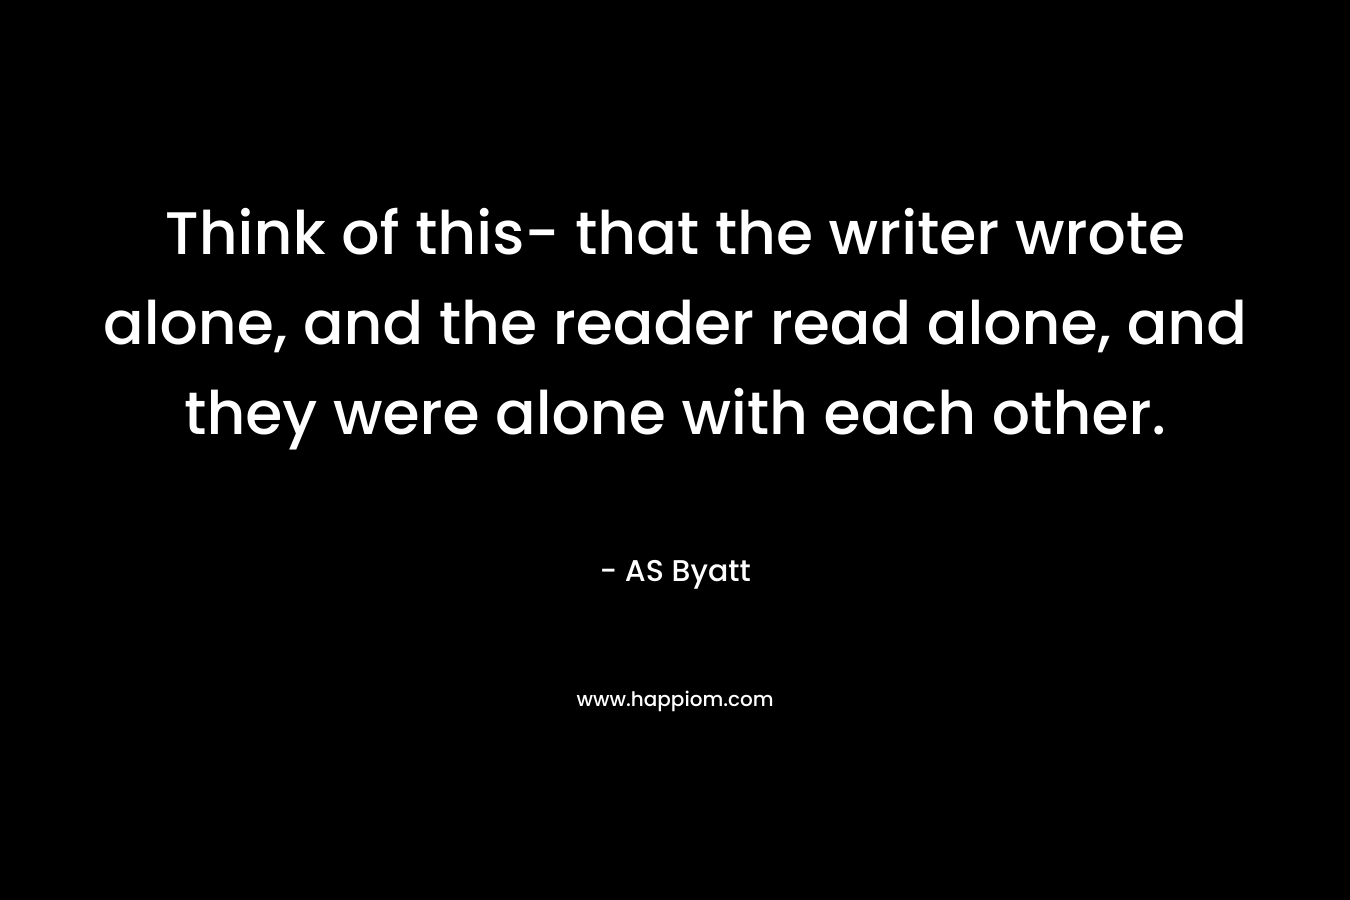 Think of this- that the writer wrote alone, and the reader read alone, and they were alone with each other. – AS Byatt